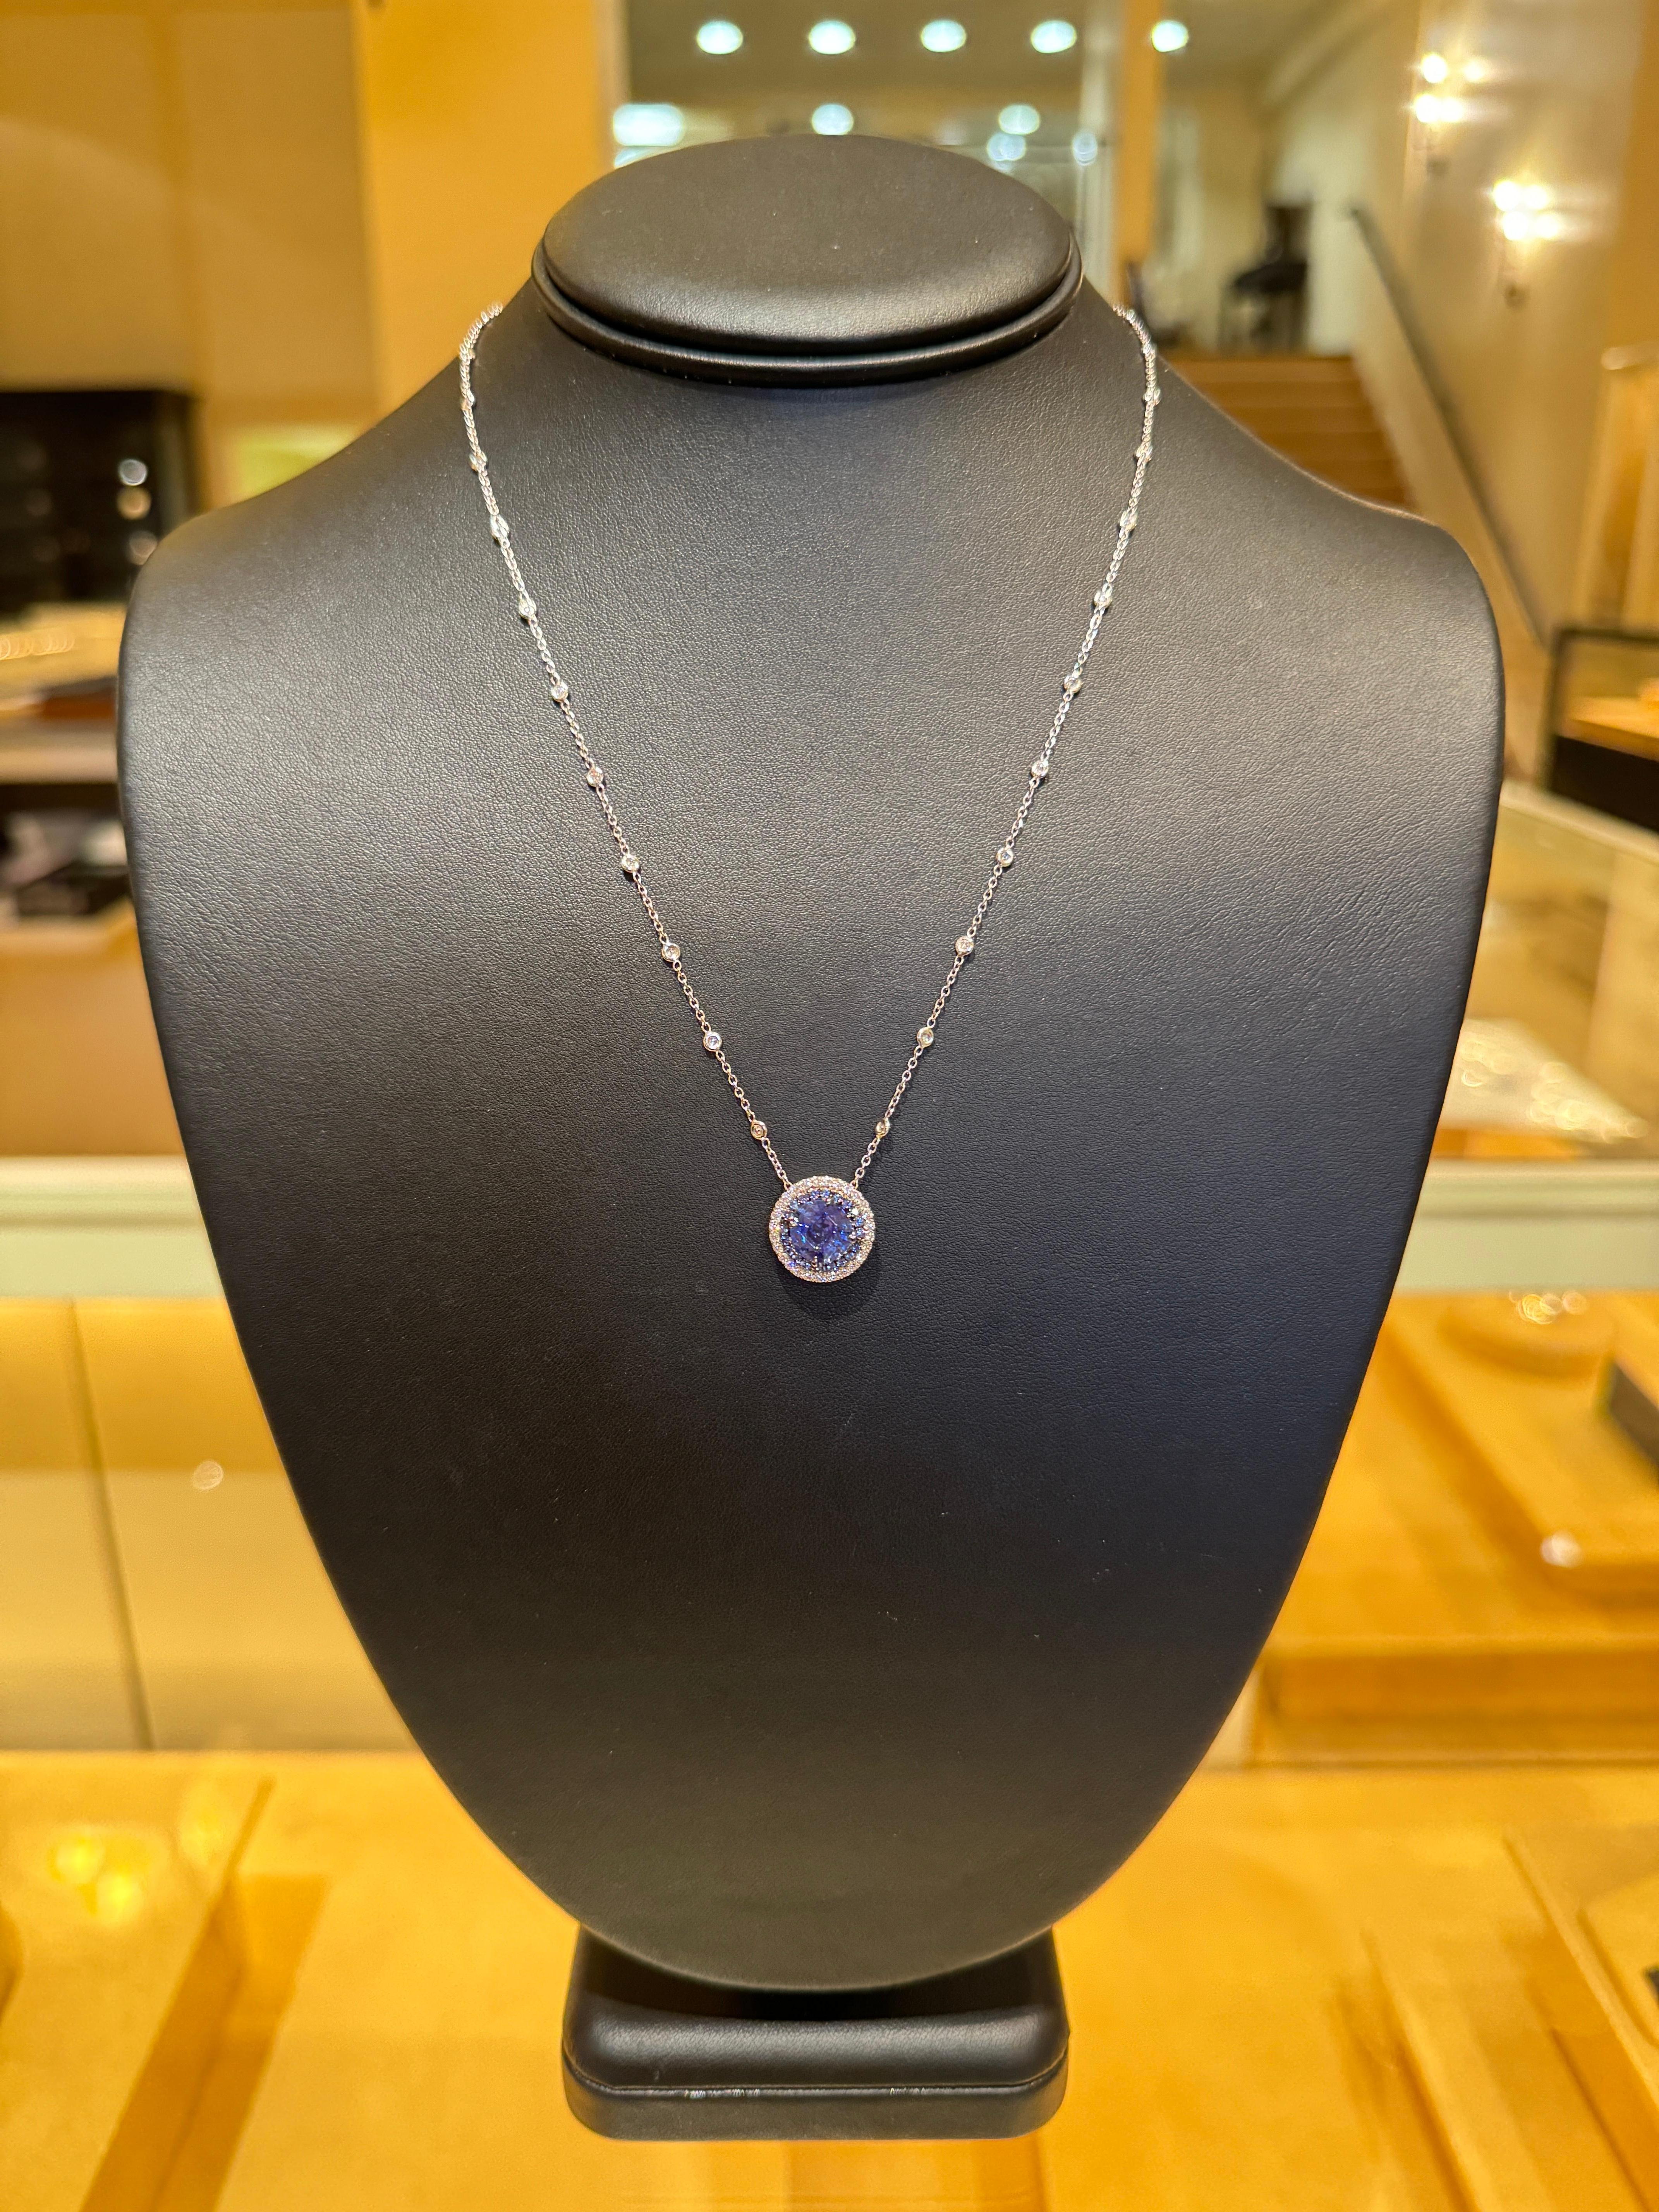 No Heat Ceylon Blue Sapphire Pendant containing 2.24ct center stone surrounded by 0.28ct sapphire halo and 0.26ct diamond halo set in 18k white gold with 18k white gold and diamond 18